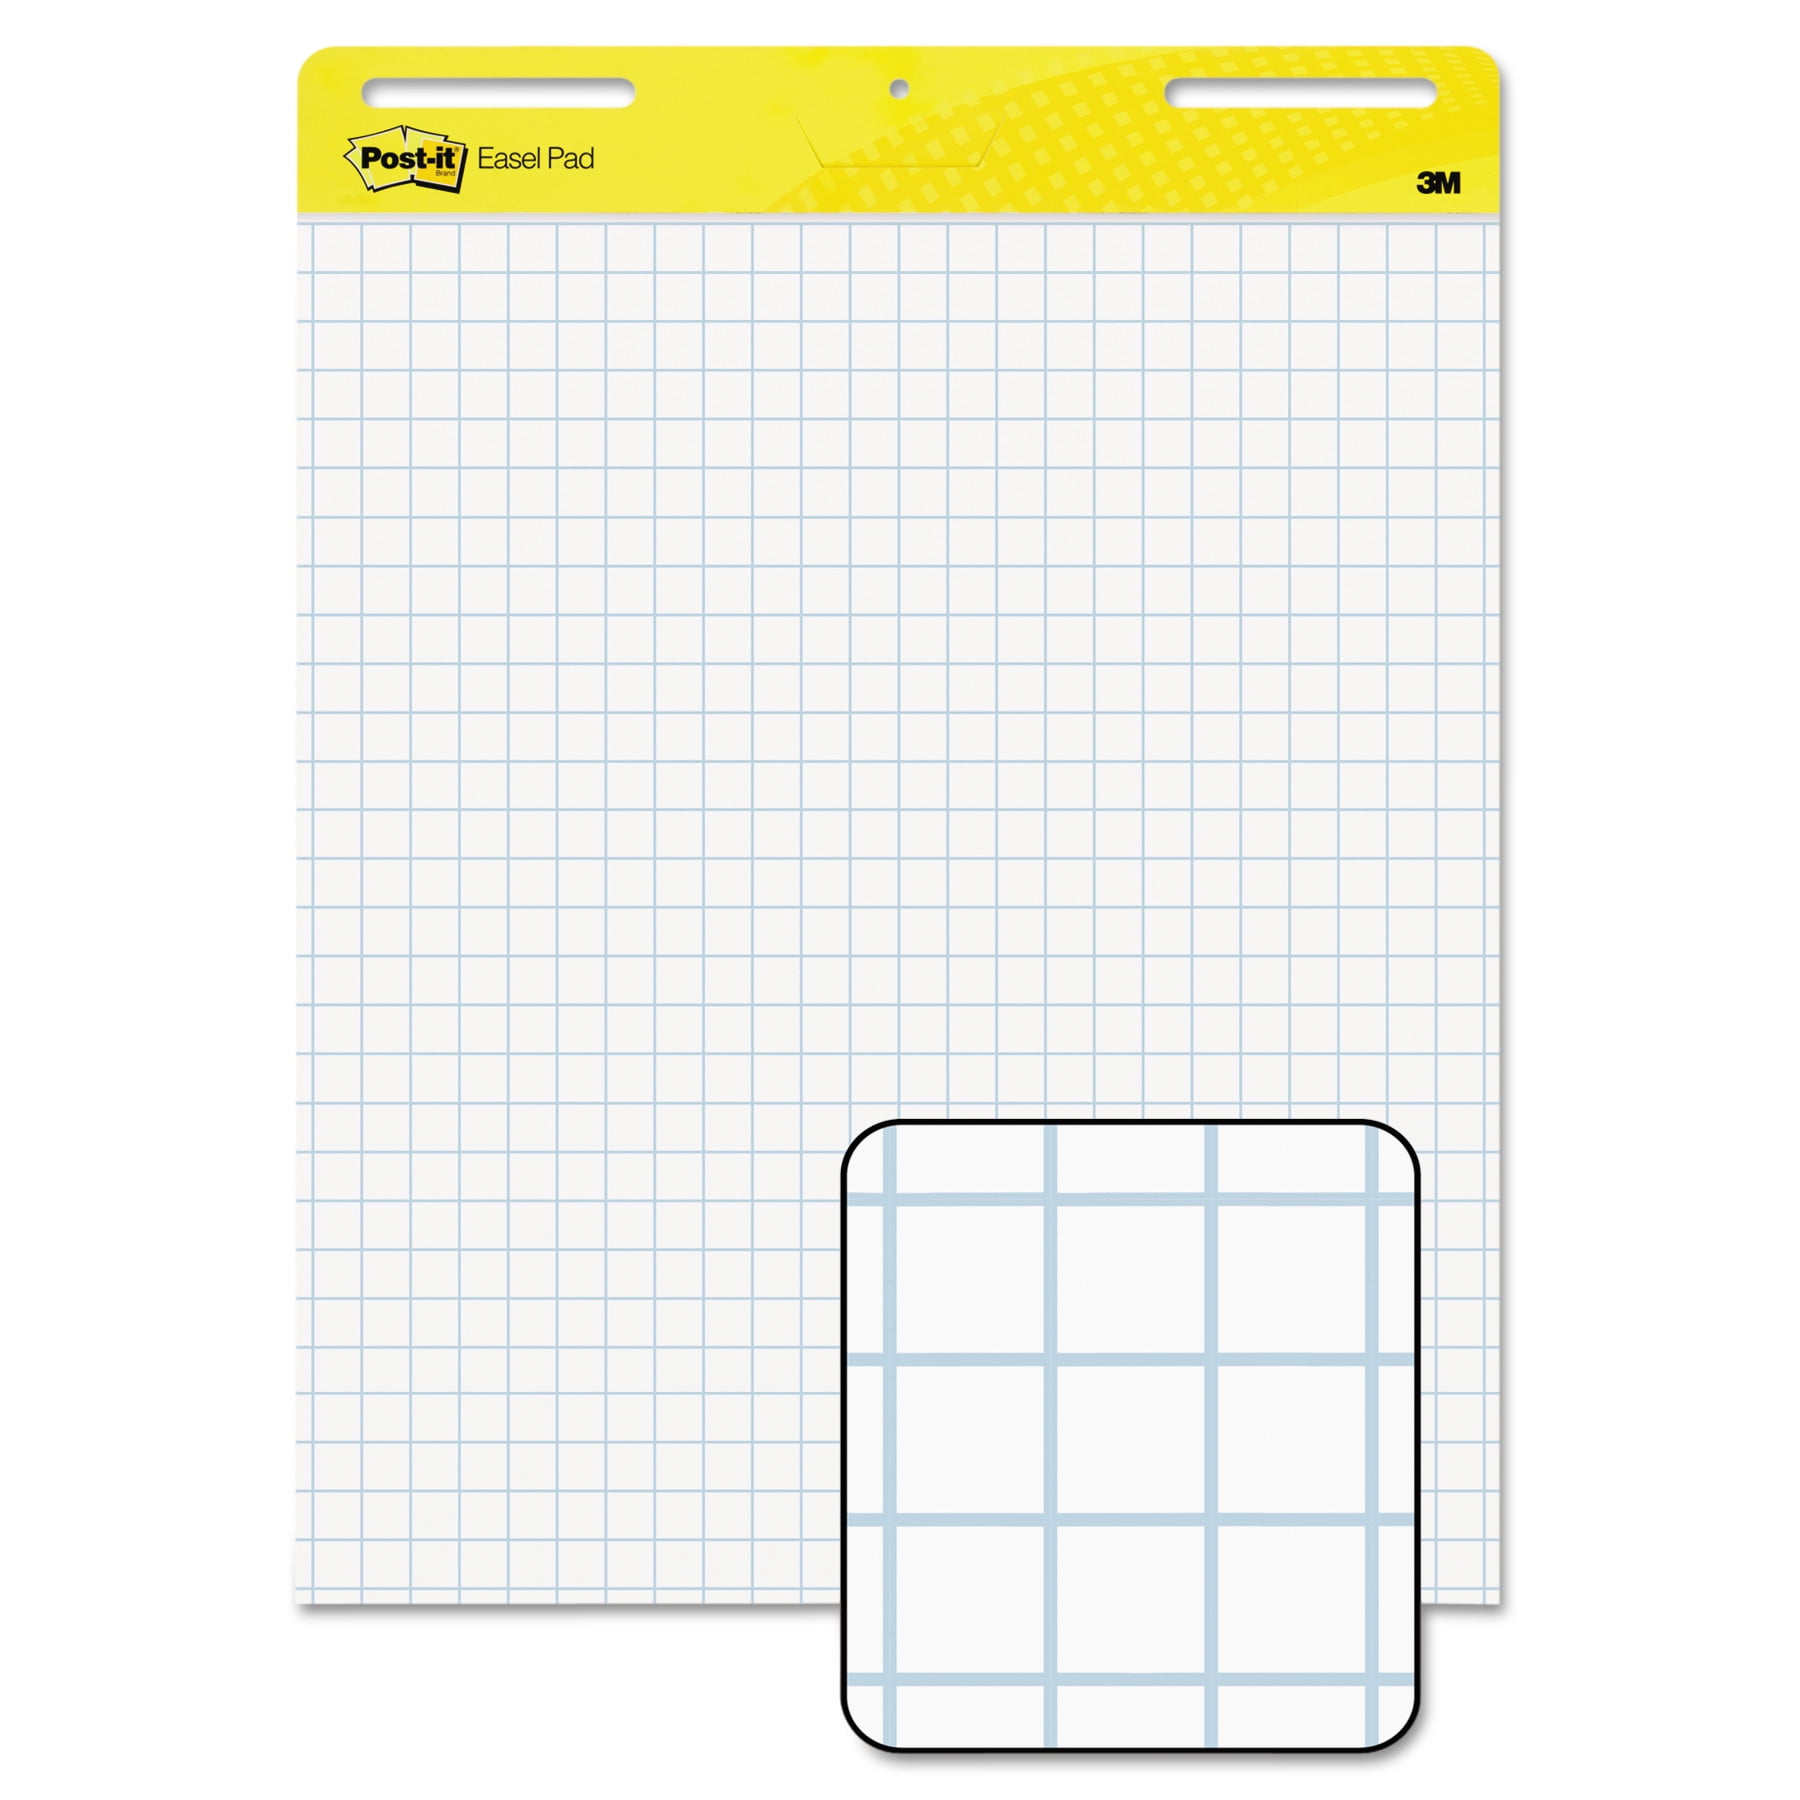 Post-it® Easel Pad, 25 in x 30 in, White, 30 Sheets/Pad, 4 Pads